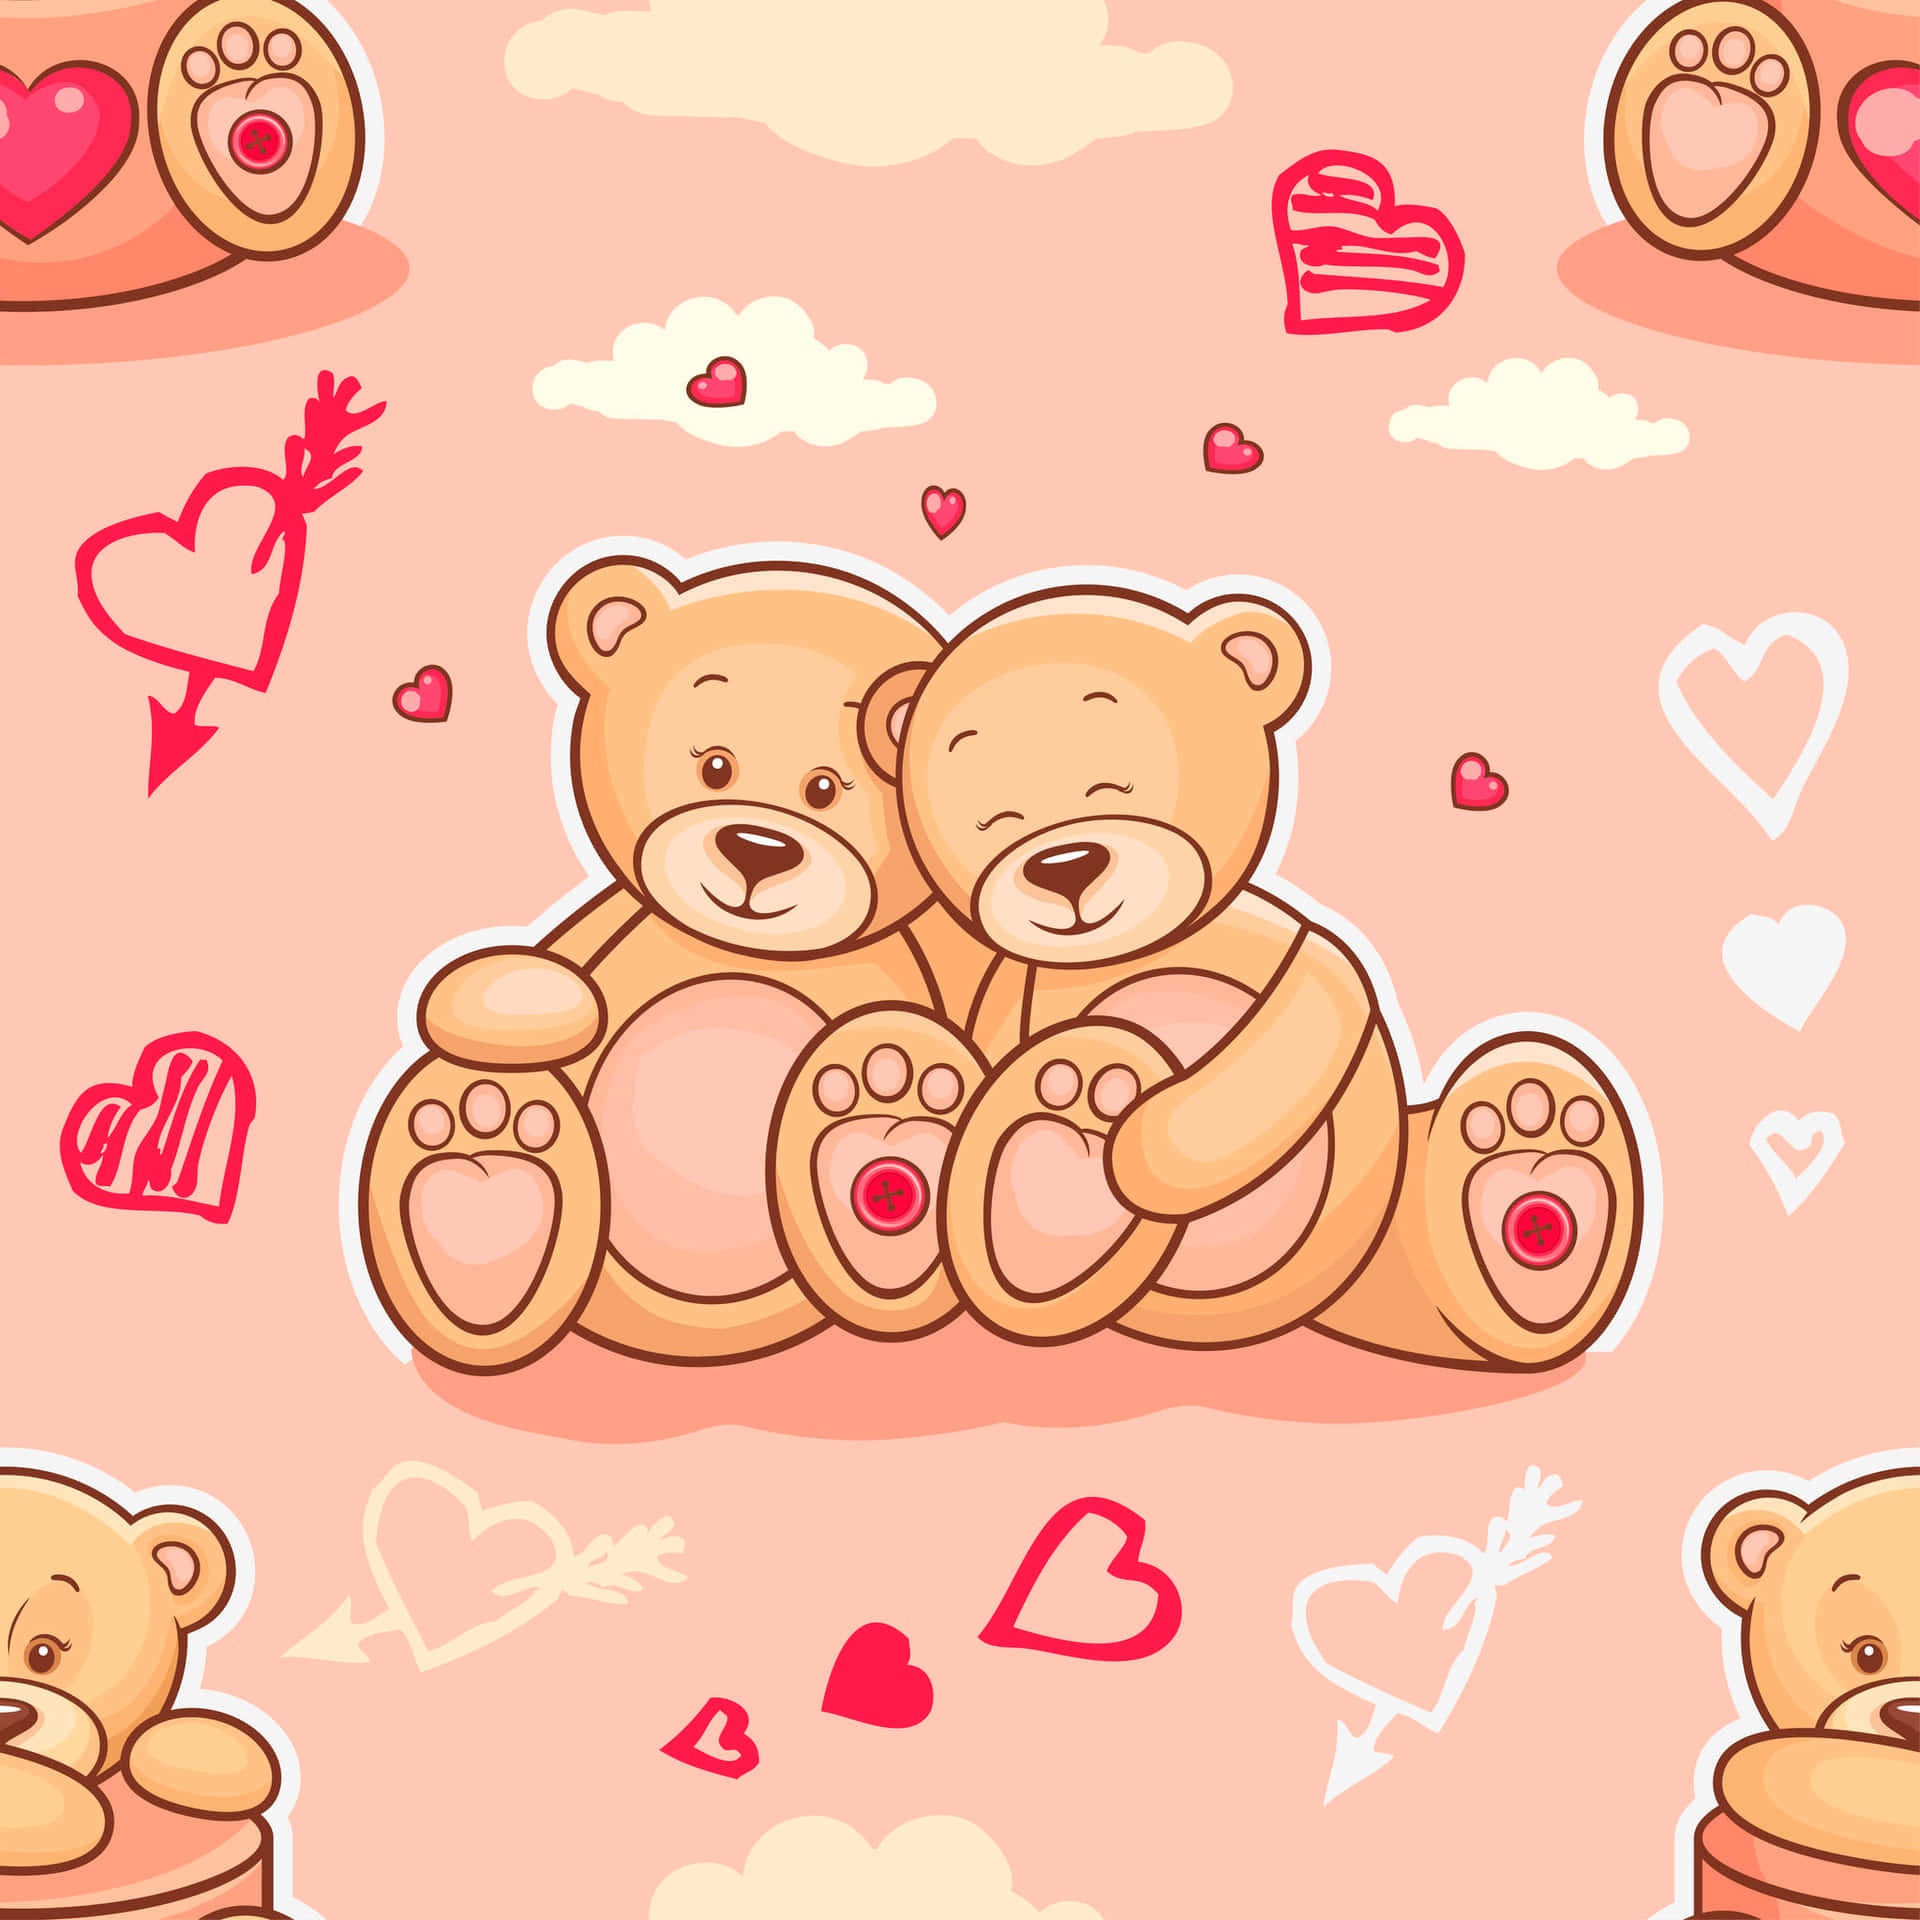 Adorable Teddy Bear On Floral Patterned Background